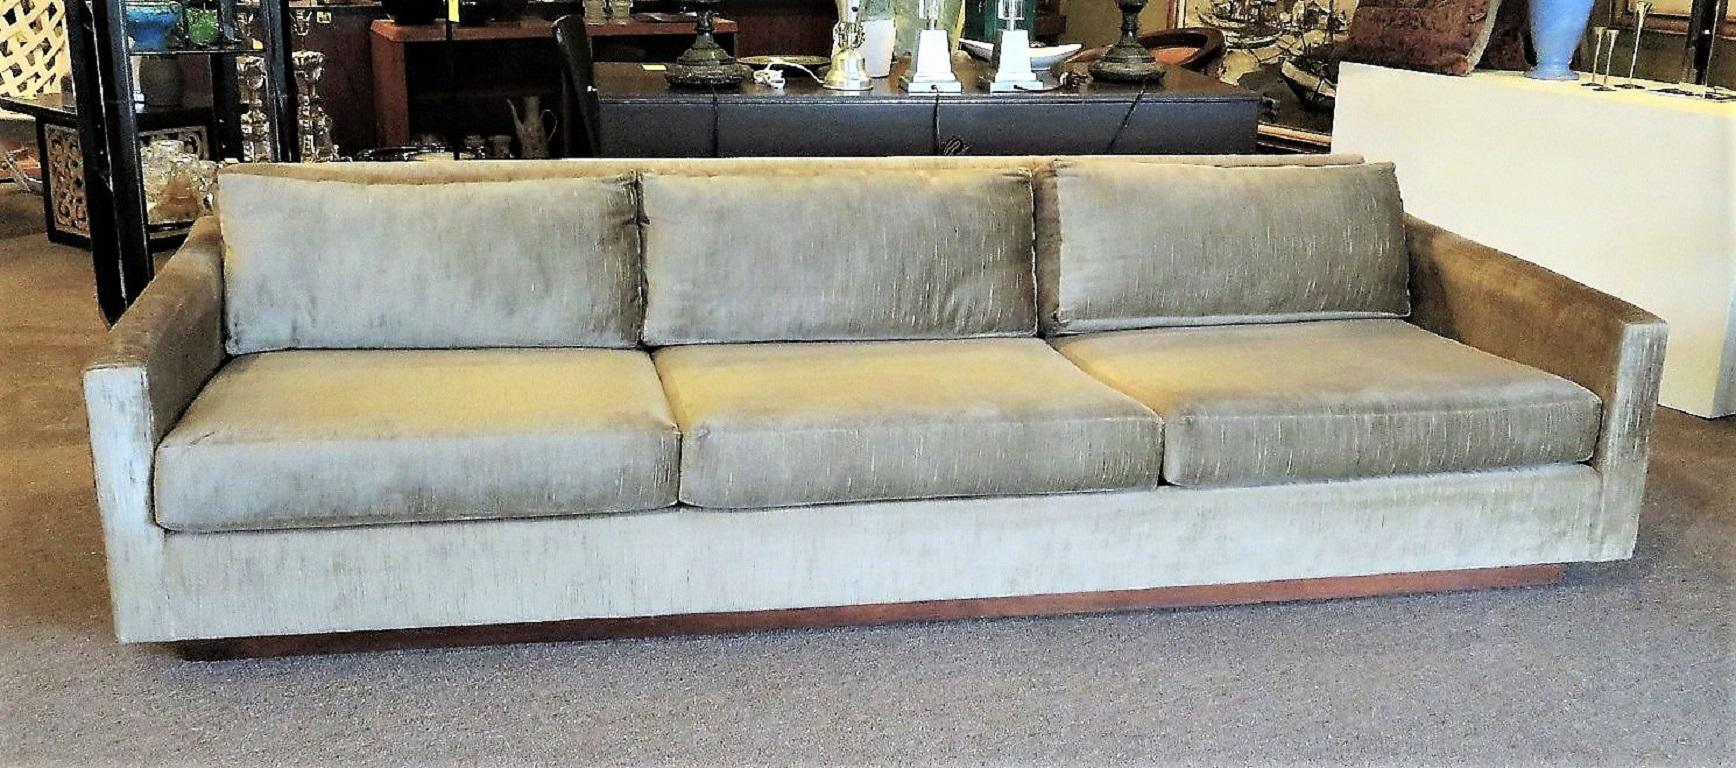 Exceptional Tuxedo sofa in a cut silk velvet attributed to Harvey Probber. A three-seater, it is raised on a walnut plinth base with feather back pillows. Unusual for a Tuxedo Style sofa in that it has a back support. Reupholstered in the 1980s, it